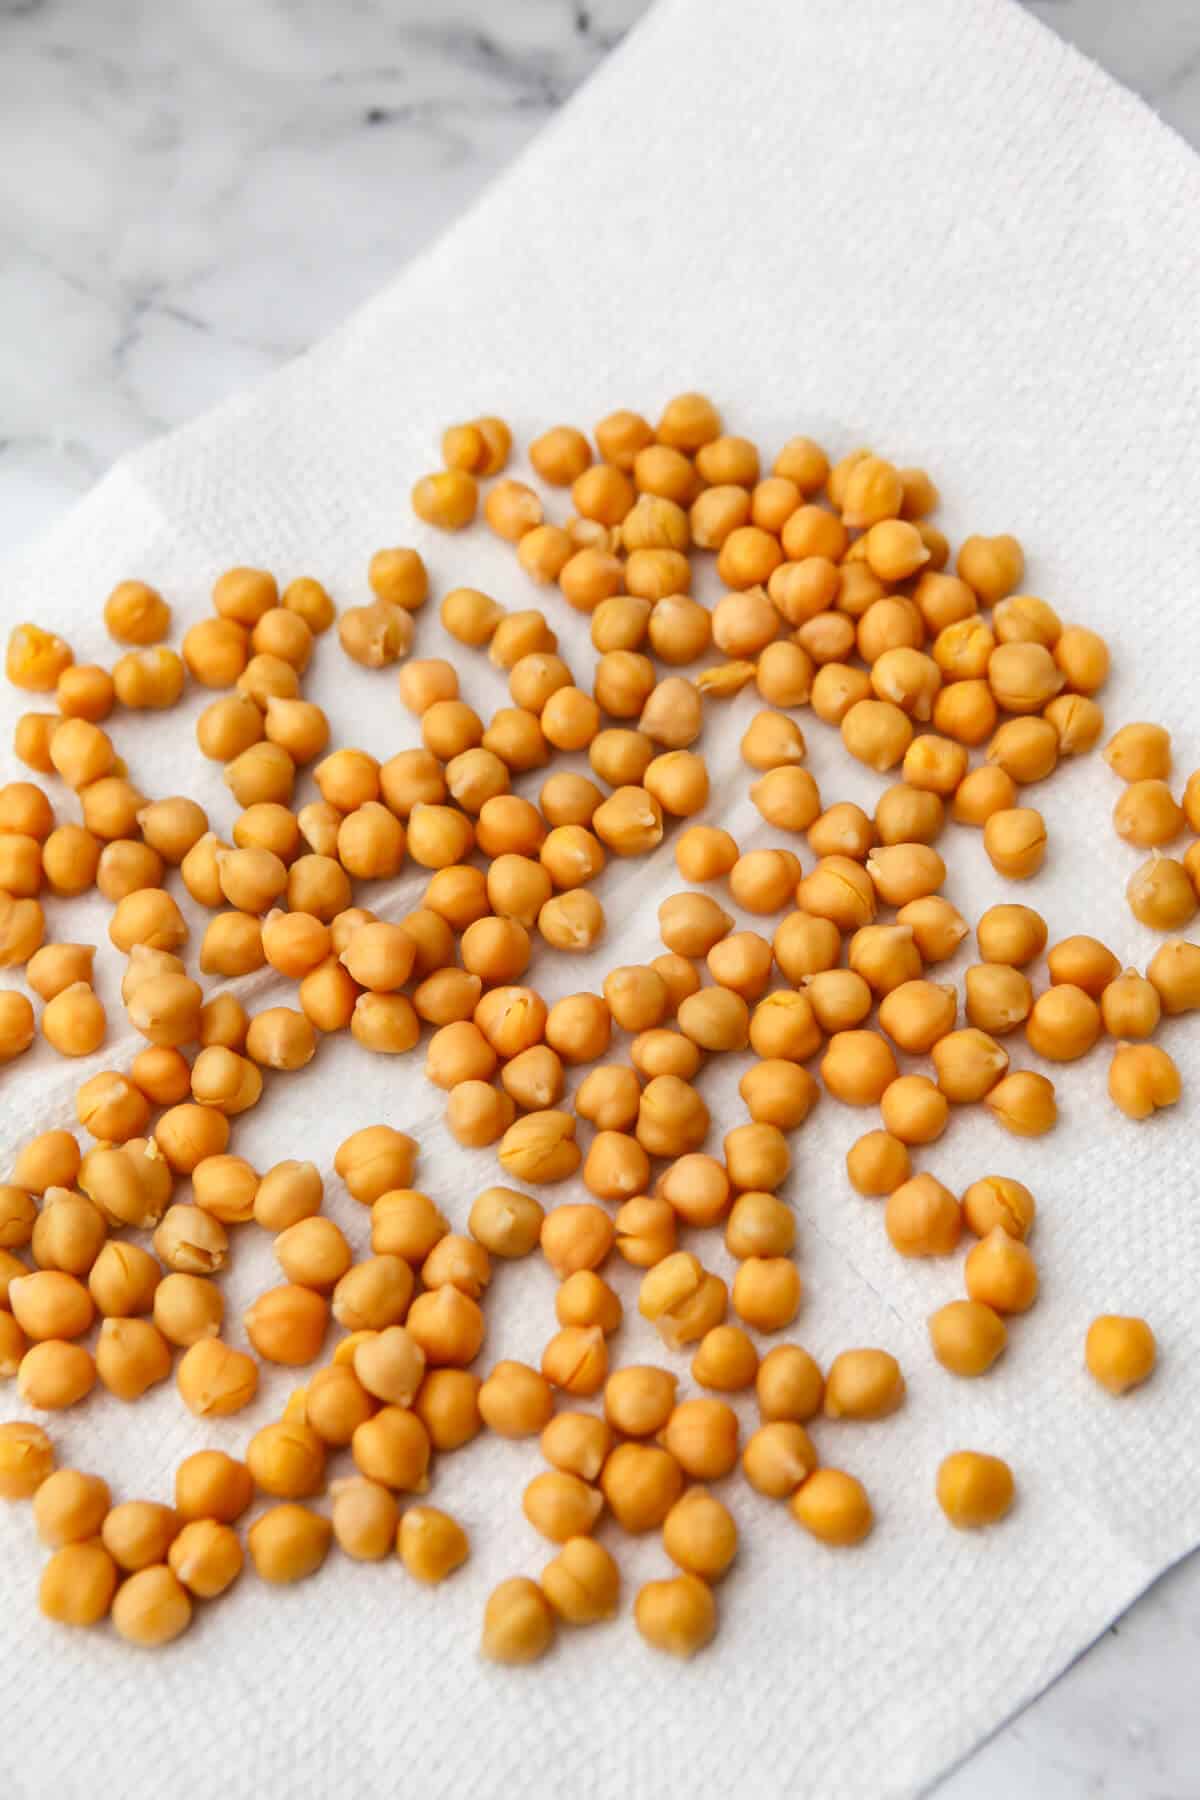 Drained and rinsed chickpeas drying on a paper towel.